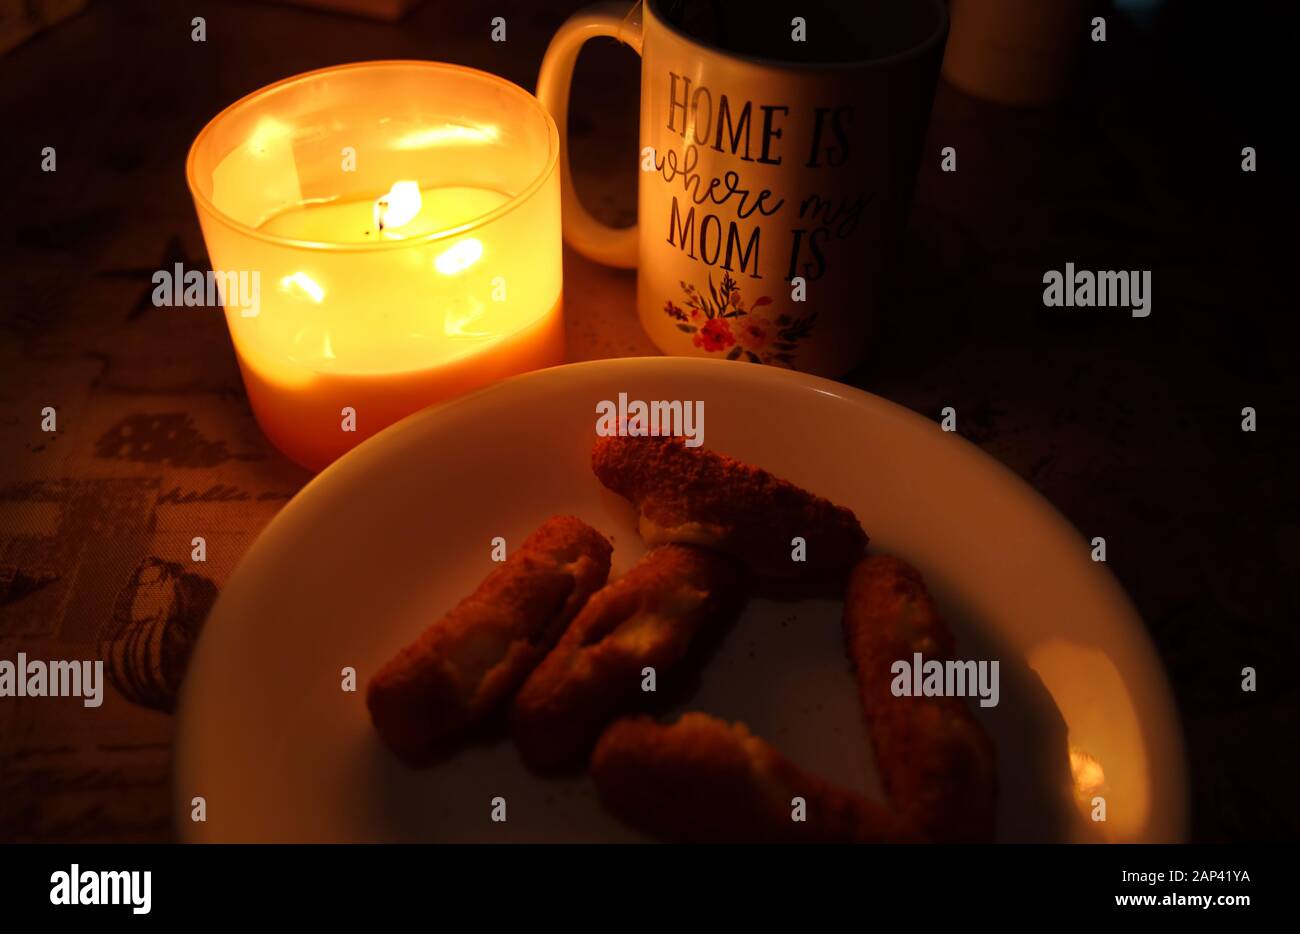 Cup with message of motherly love and home under candle light, and a plate with a treat mozzarella sticks for mom. Stock Photo